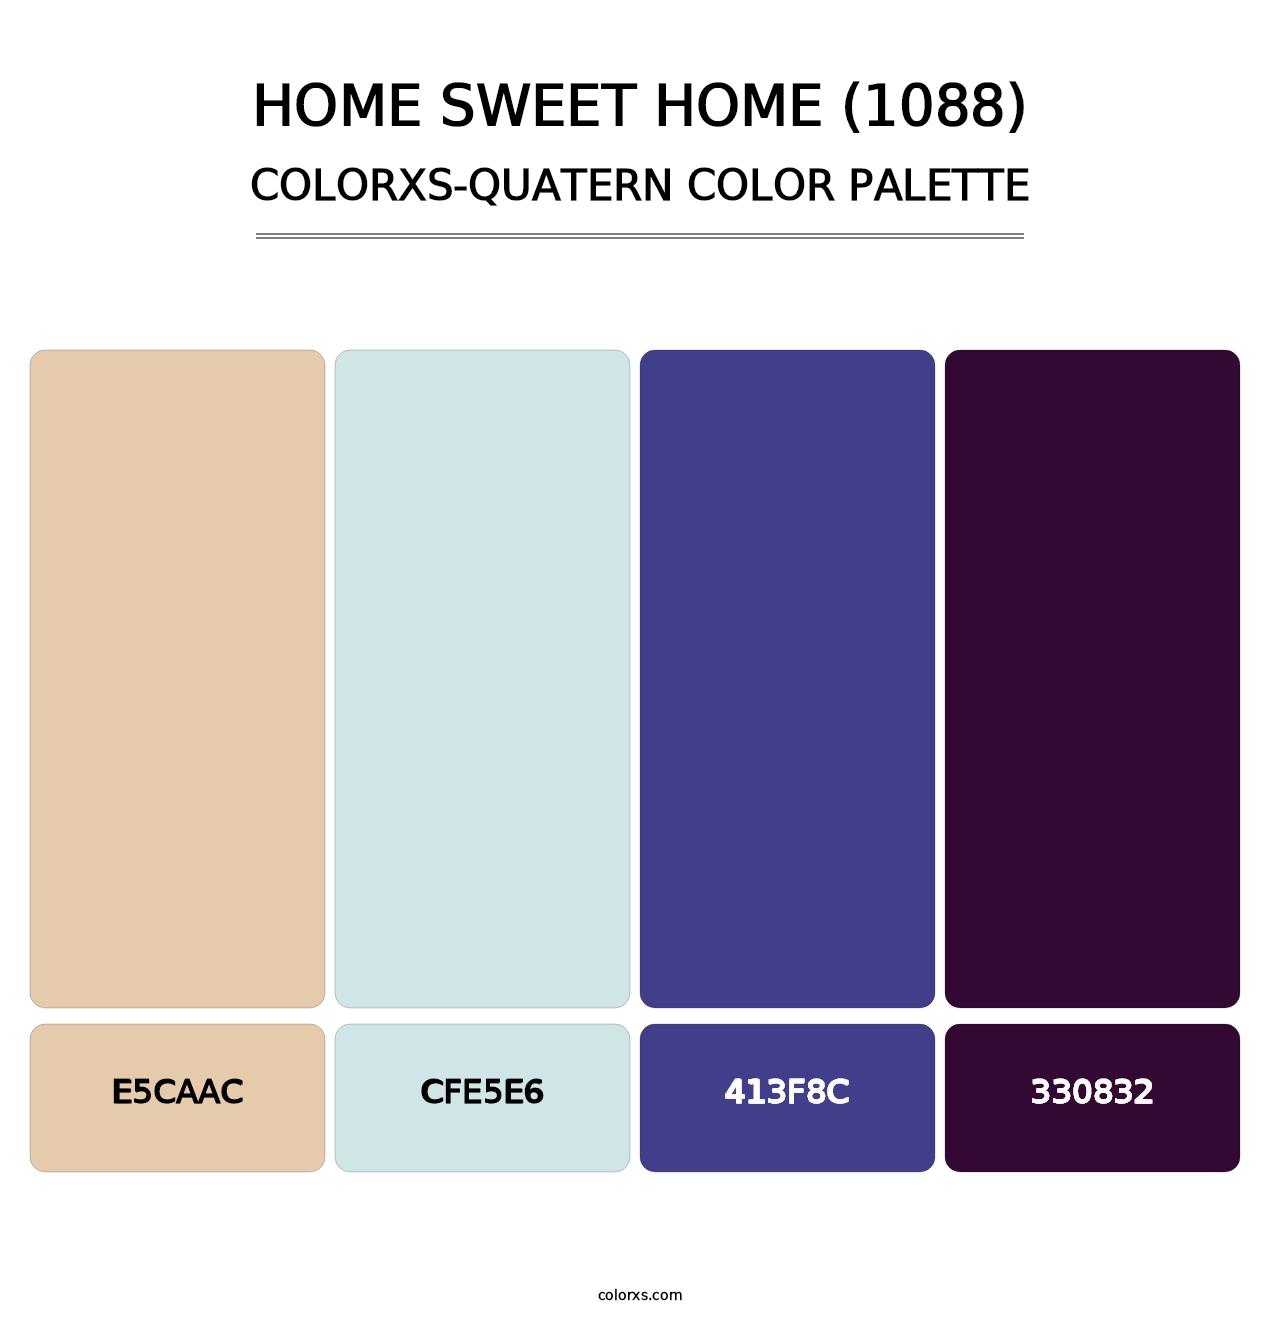 Home Sweet Home (1088) - Colorxs Quatern Palette